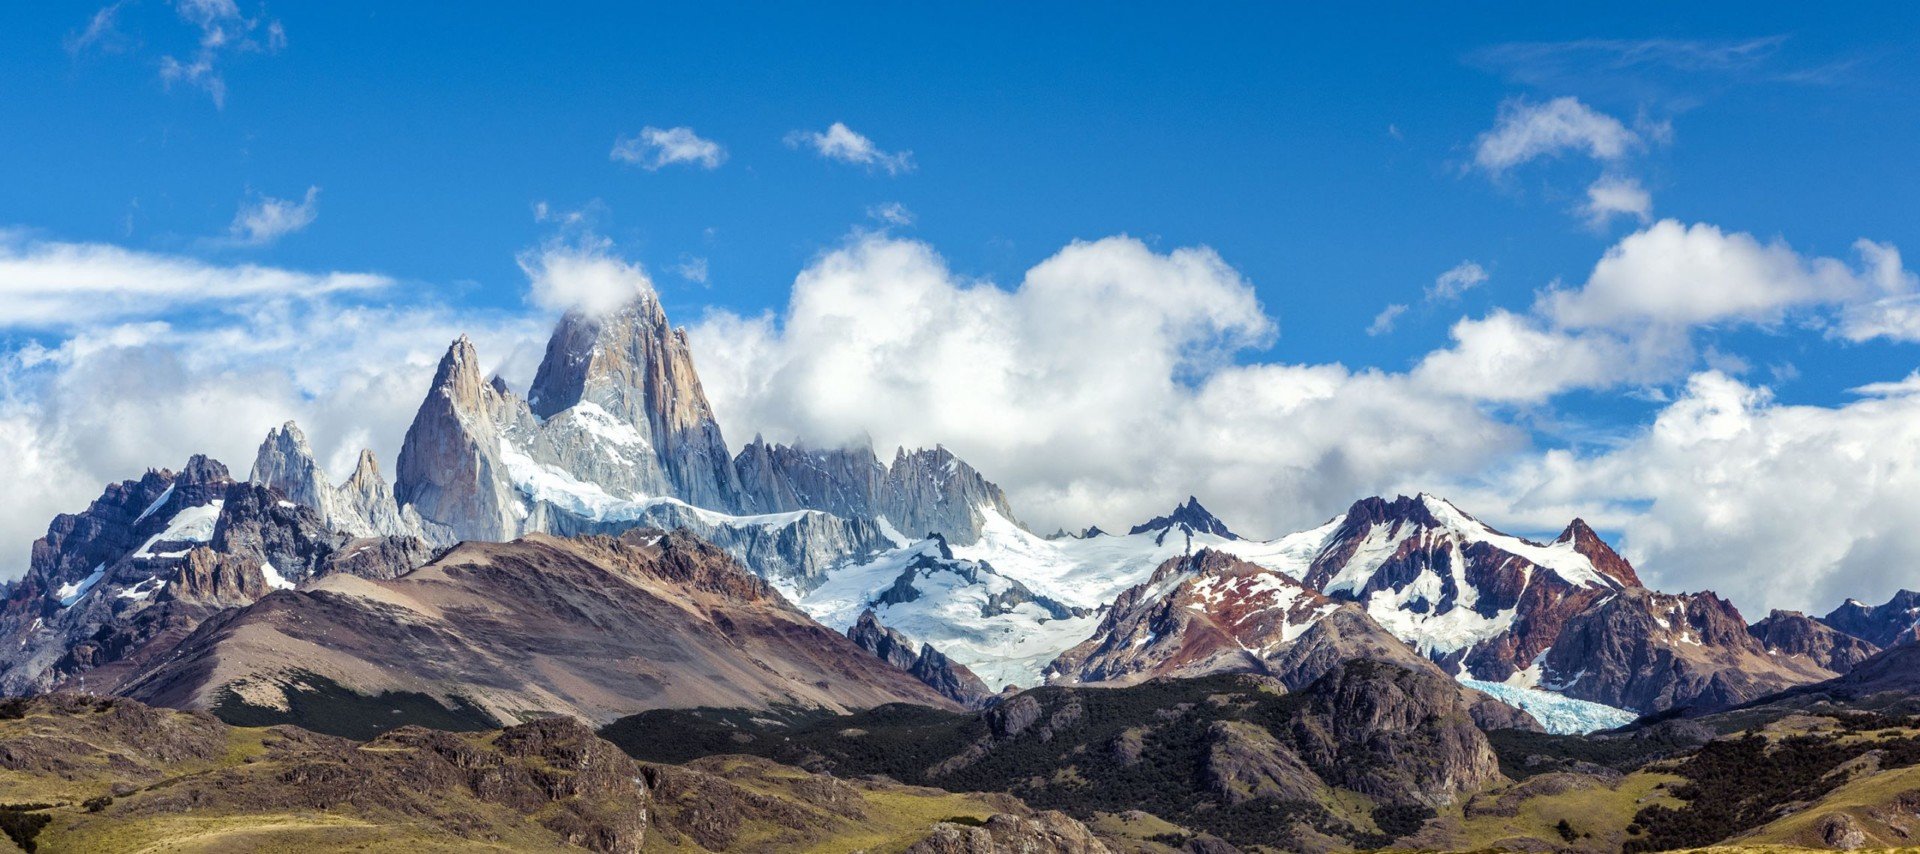 snowcapped mountains in argentine patagonia